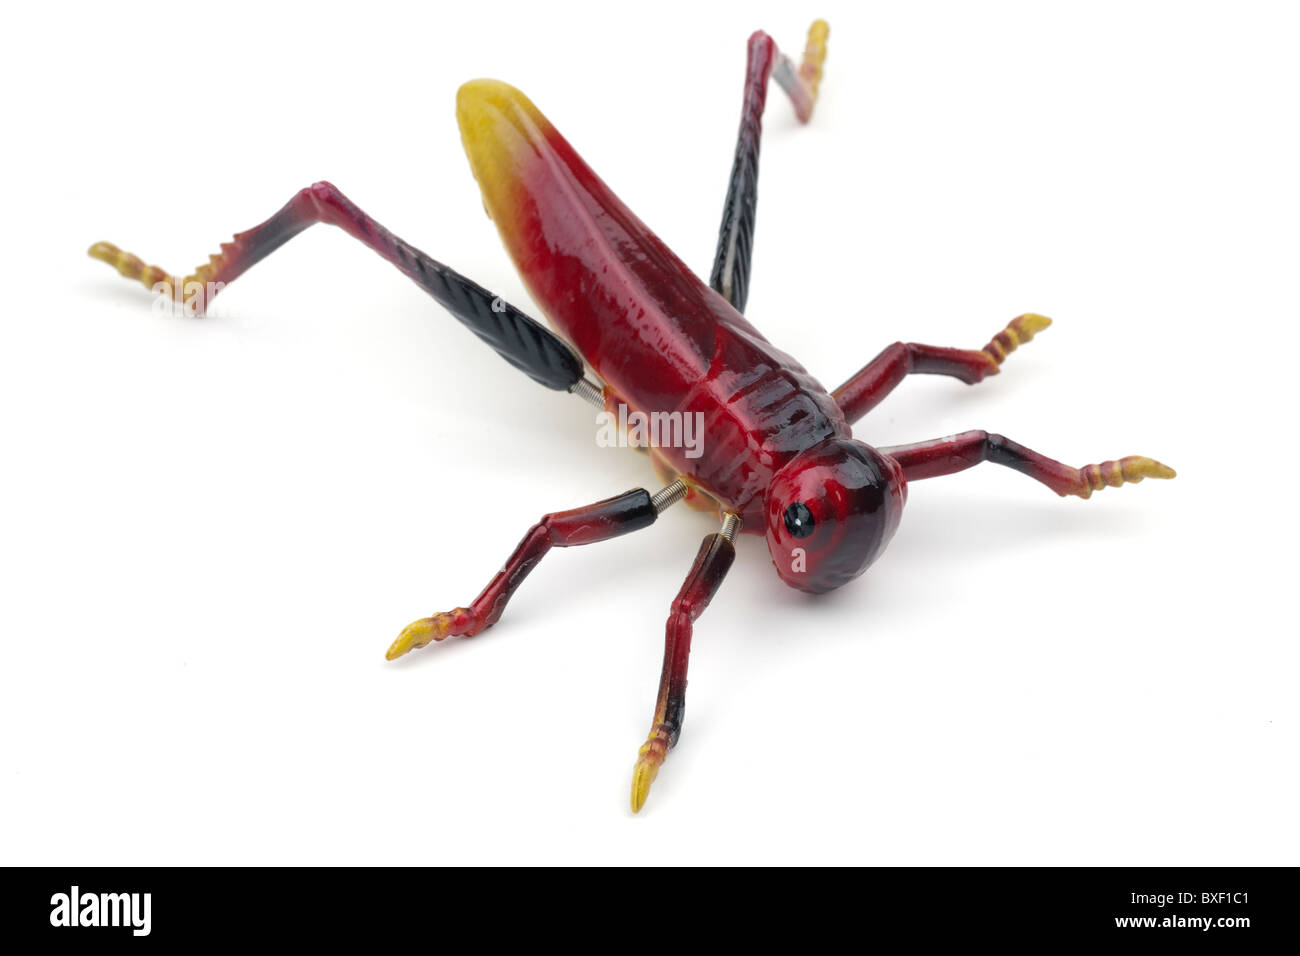 Six Legged Insect High Resolution Stock Photography and Images - Alamy